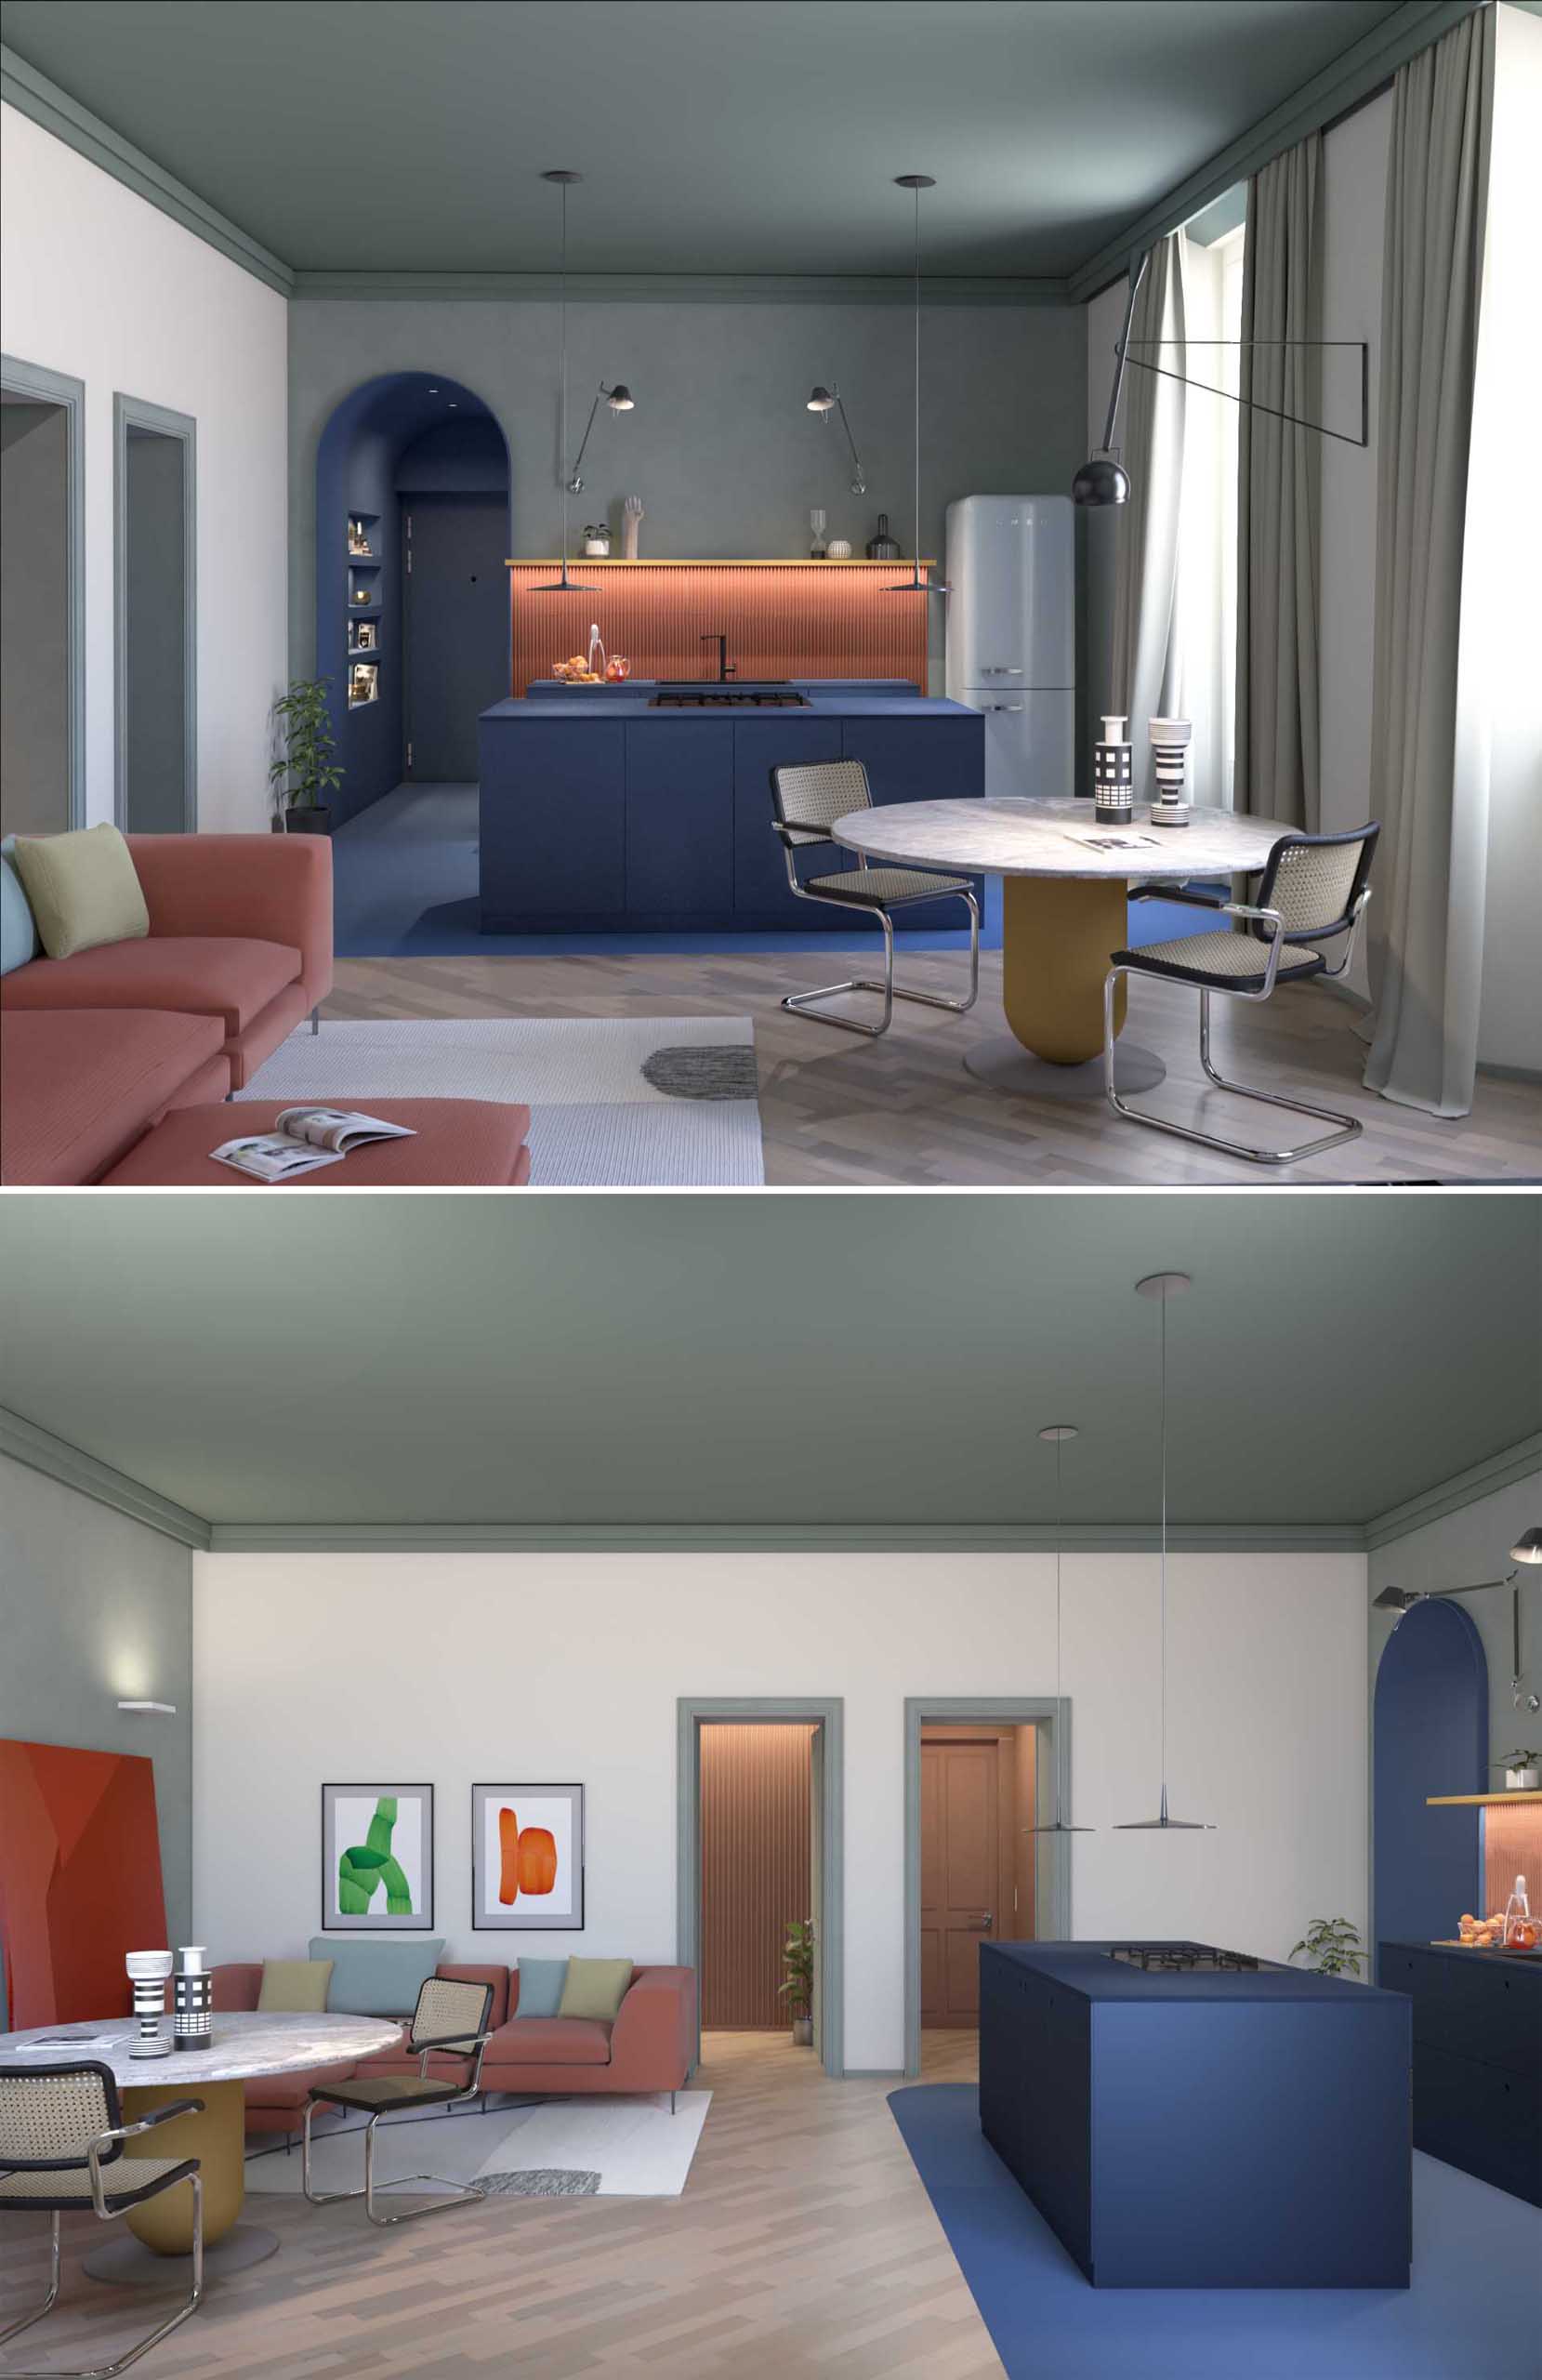 The rendering of an apartment interior with a blue kitchen.